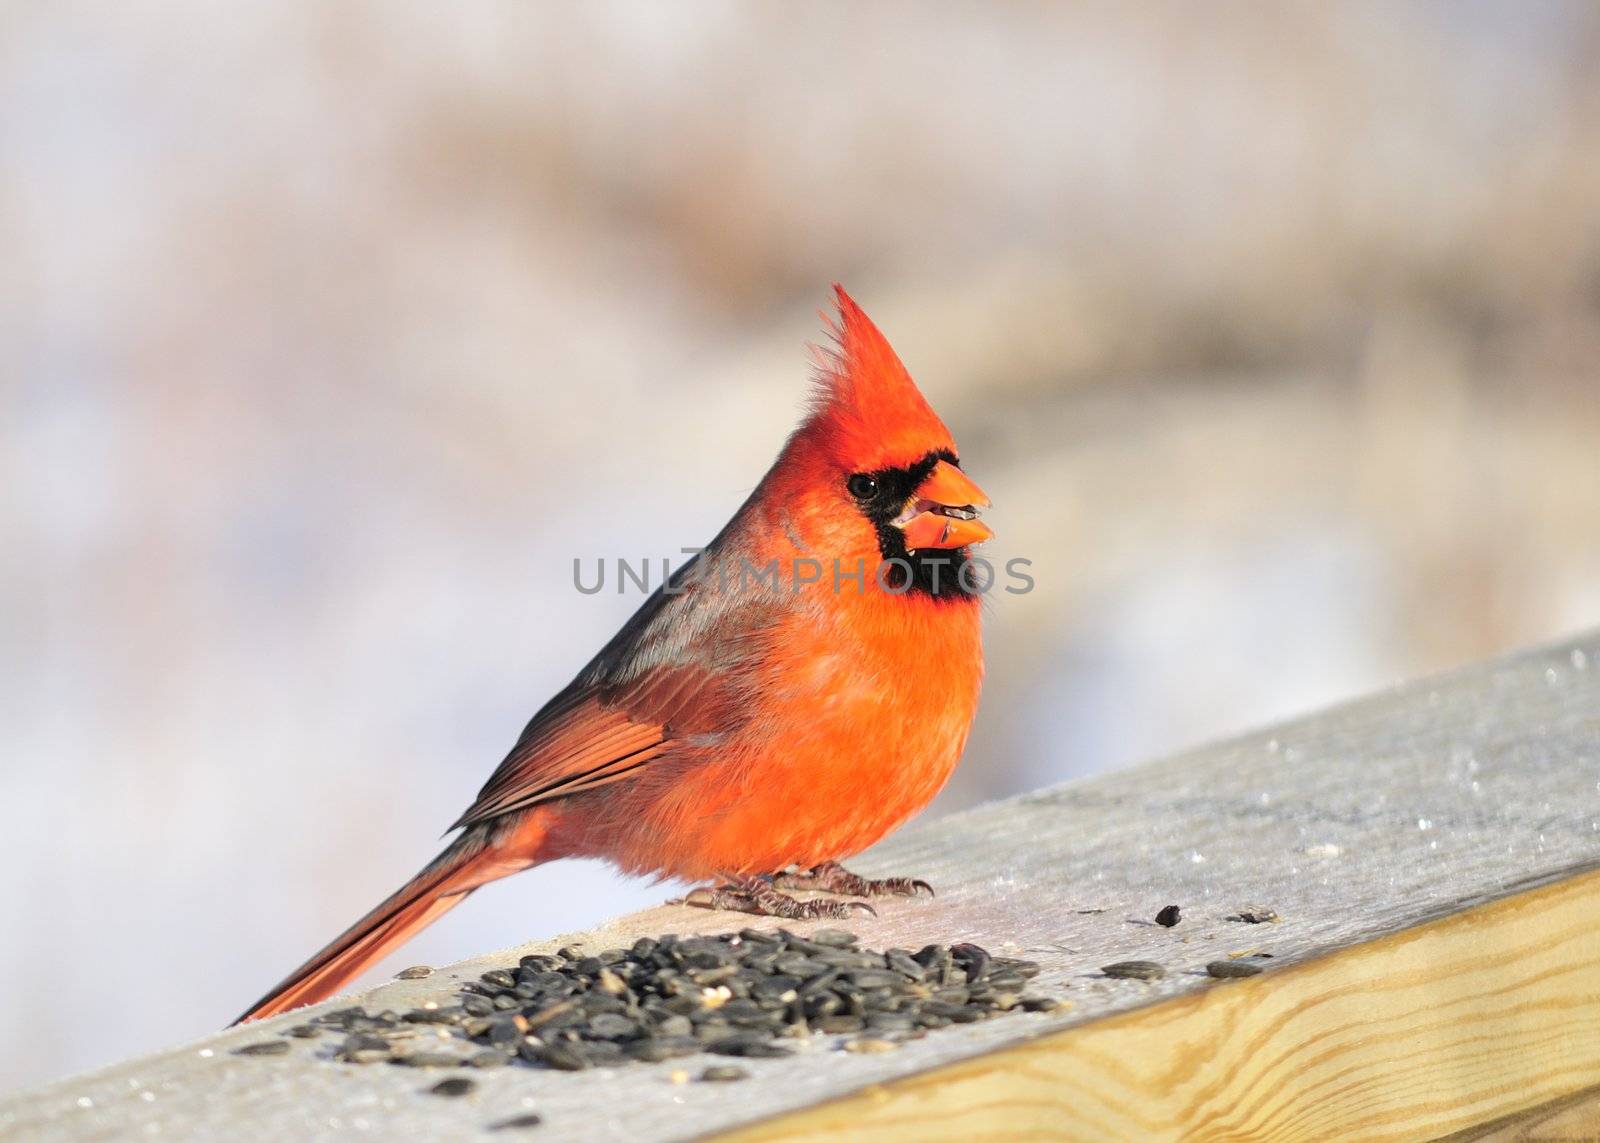 A male cardinal perched on a wooden rail with bird seed.